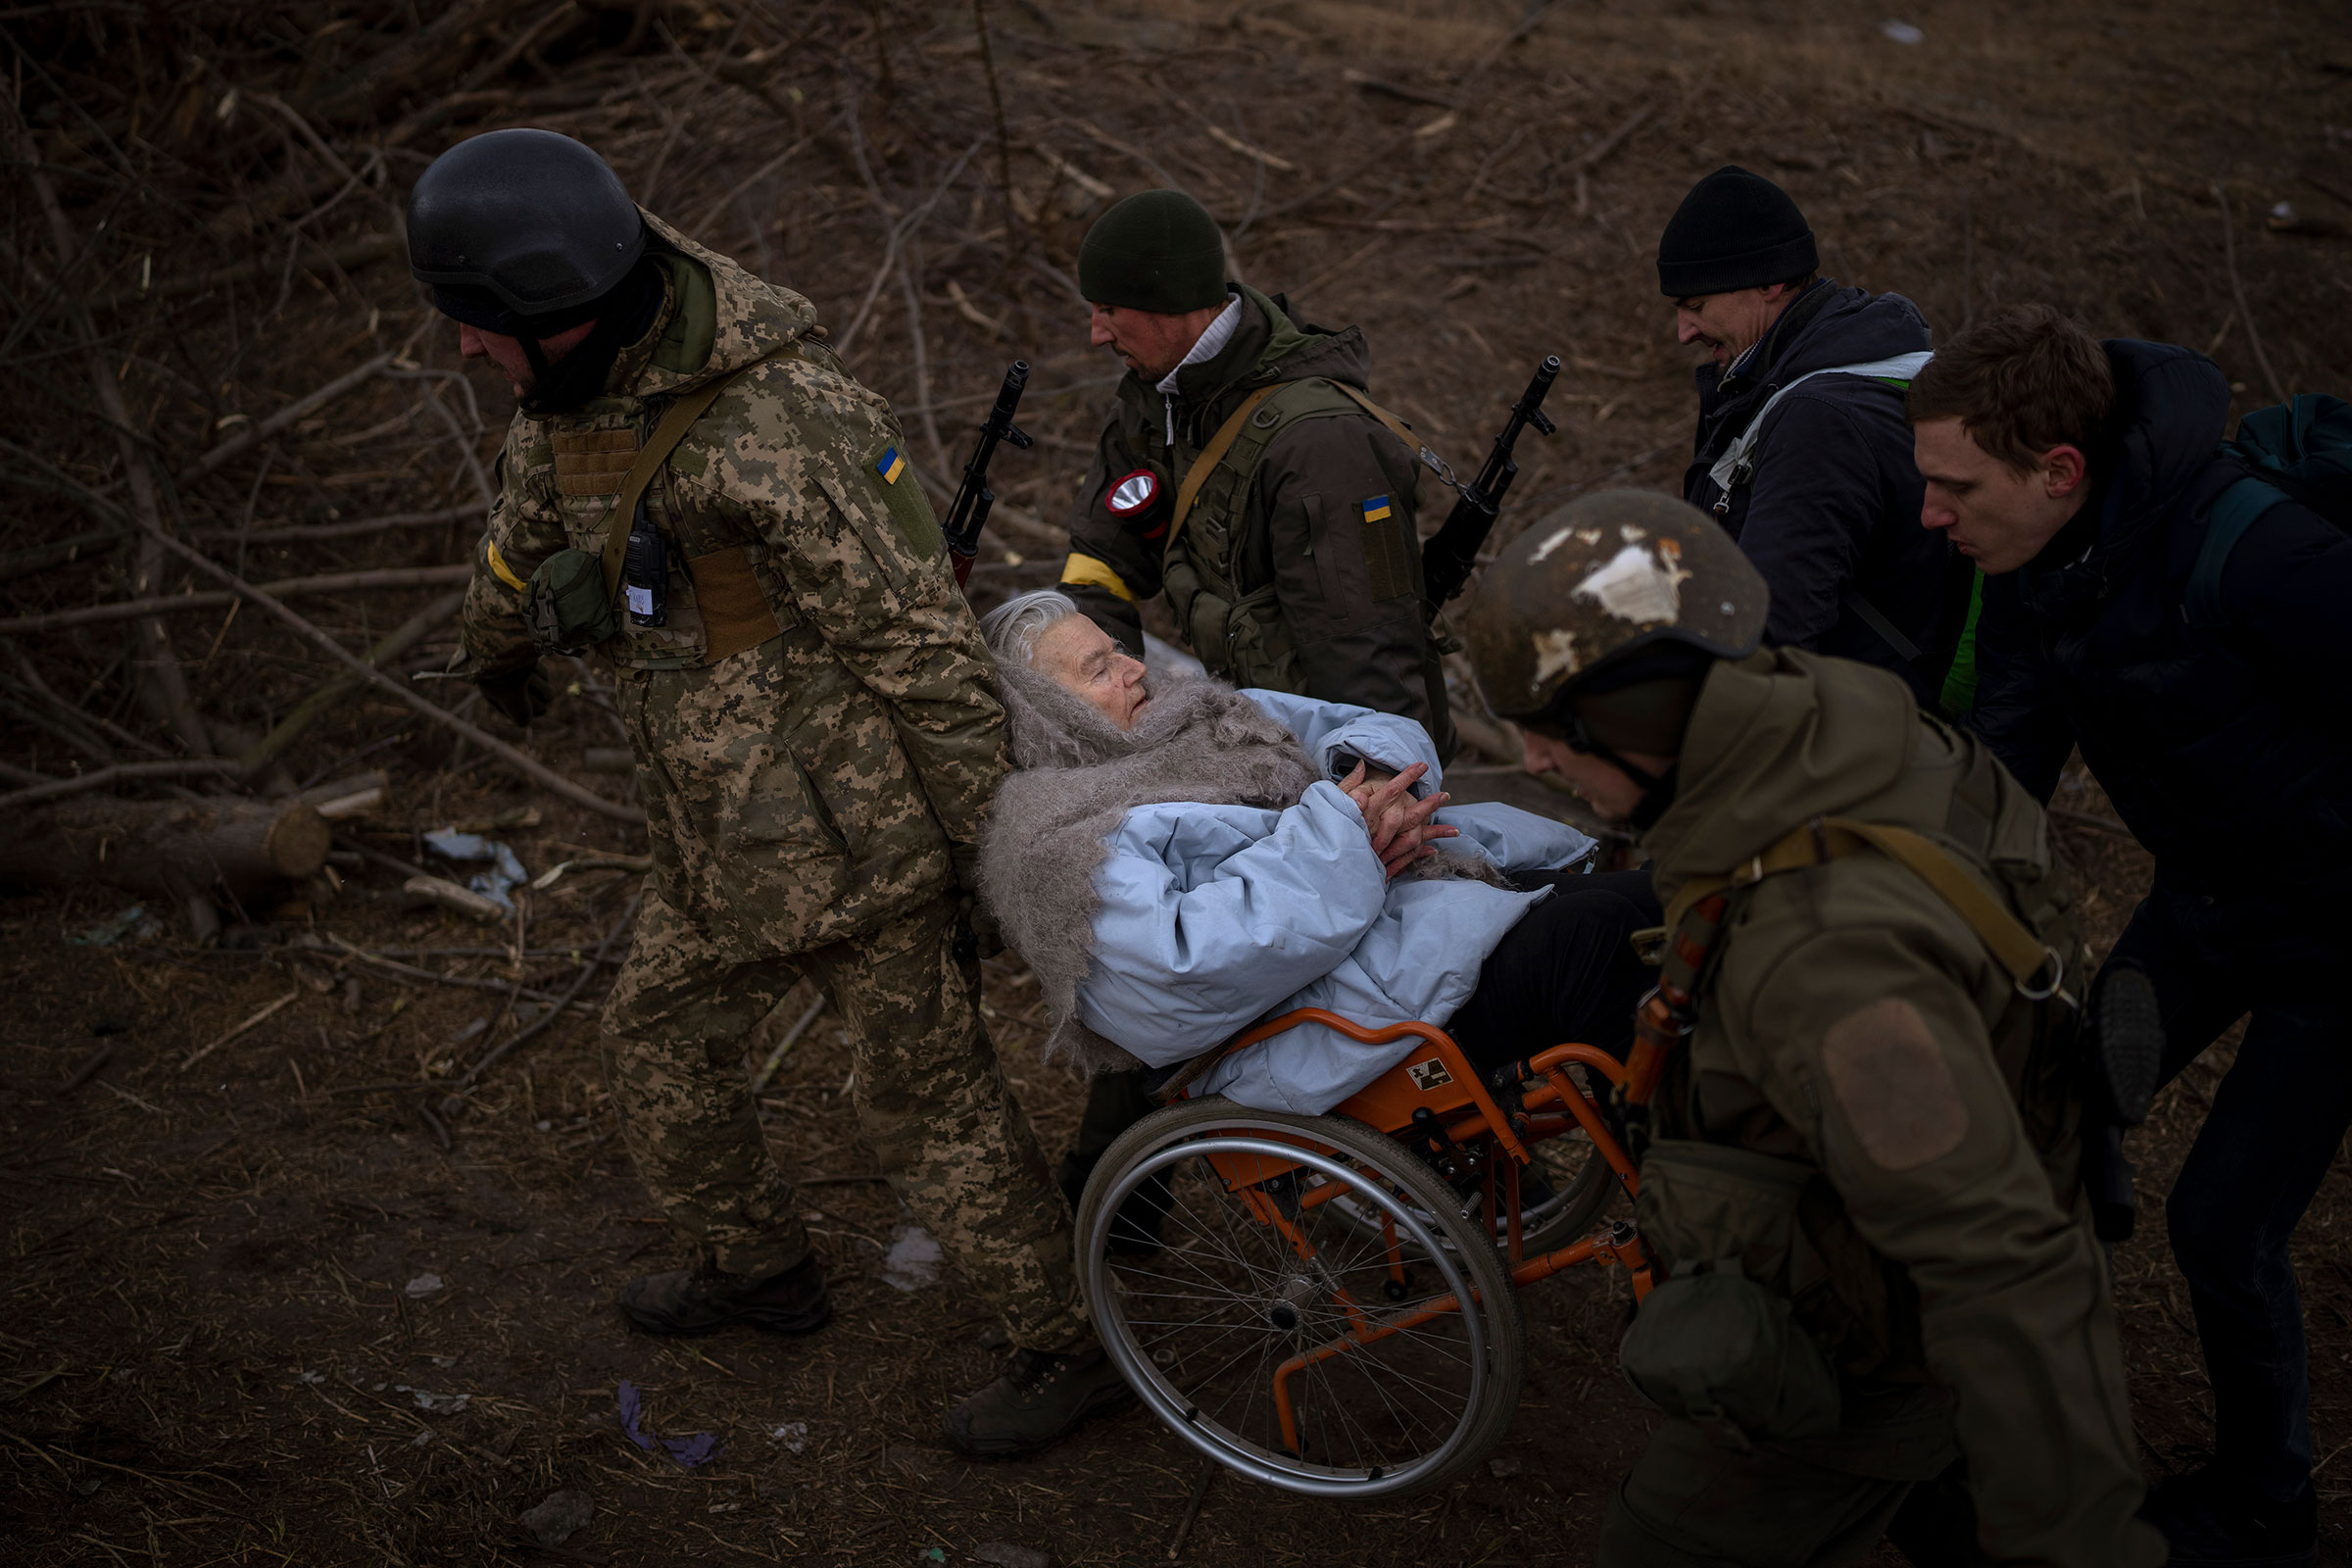 Ukrainian soldiers and militiamen carry a woman in a wheelchair as the artillery echoes nearby, while people flee Irpin on the outskirts of Kyiv on March 7. (Emilio Morenatti—AP)